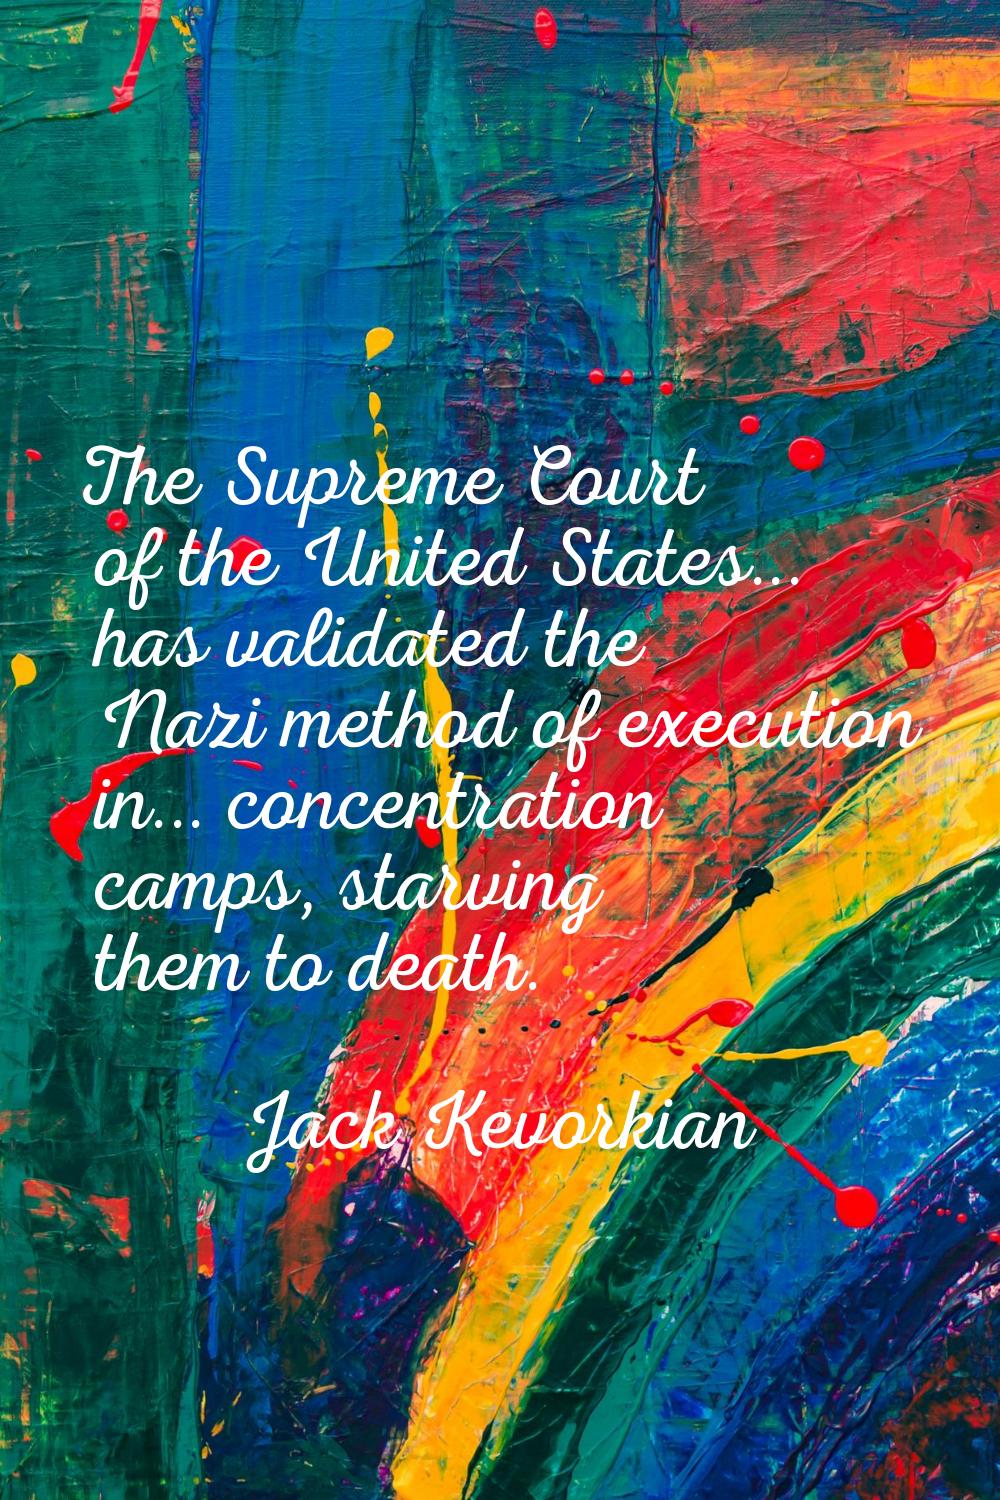 The Supreme Court of the United States... has validated the Nazi method of execution in... concentr